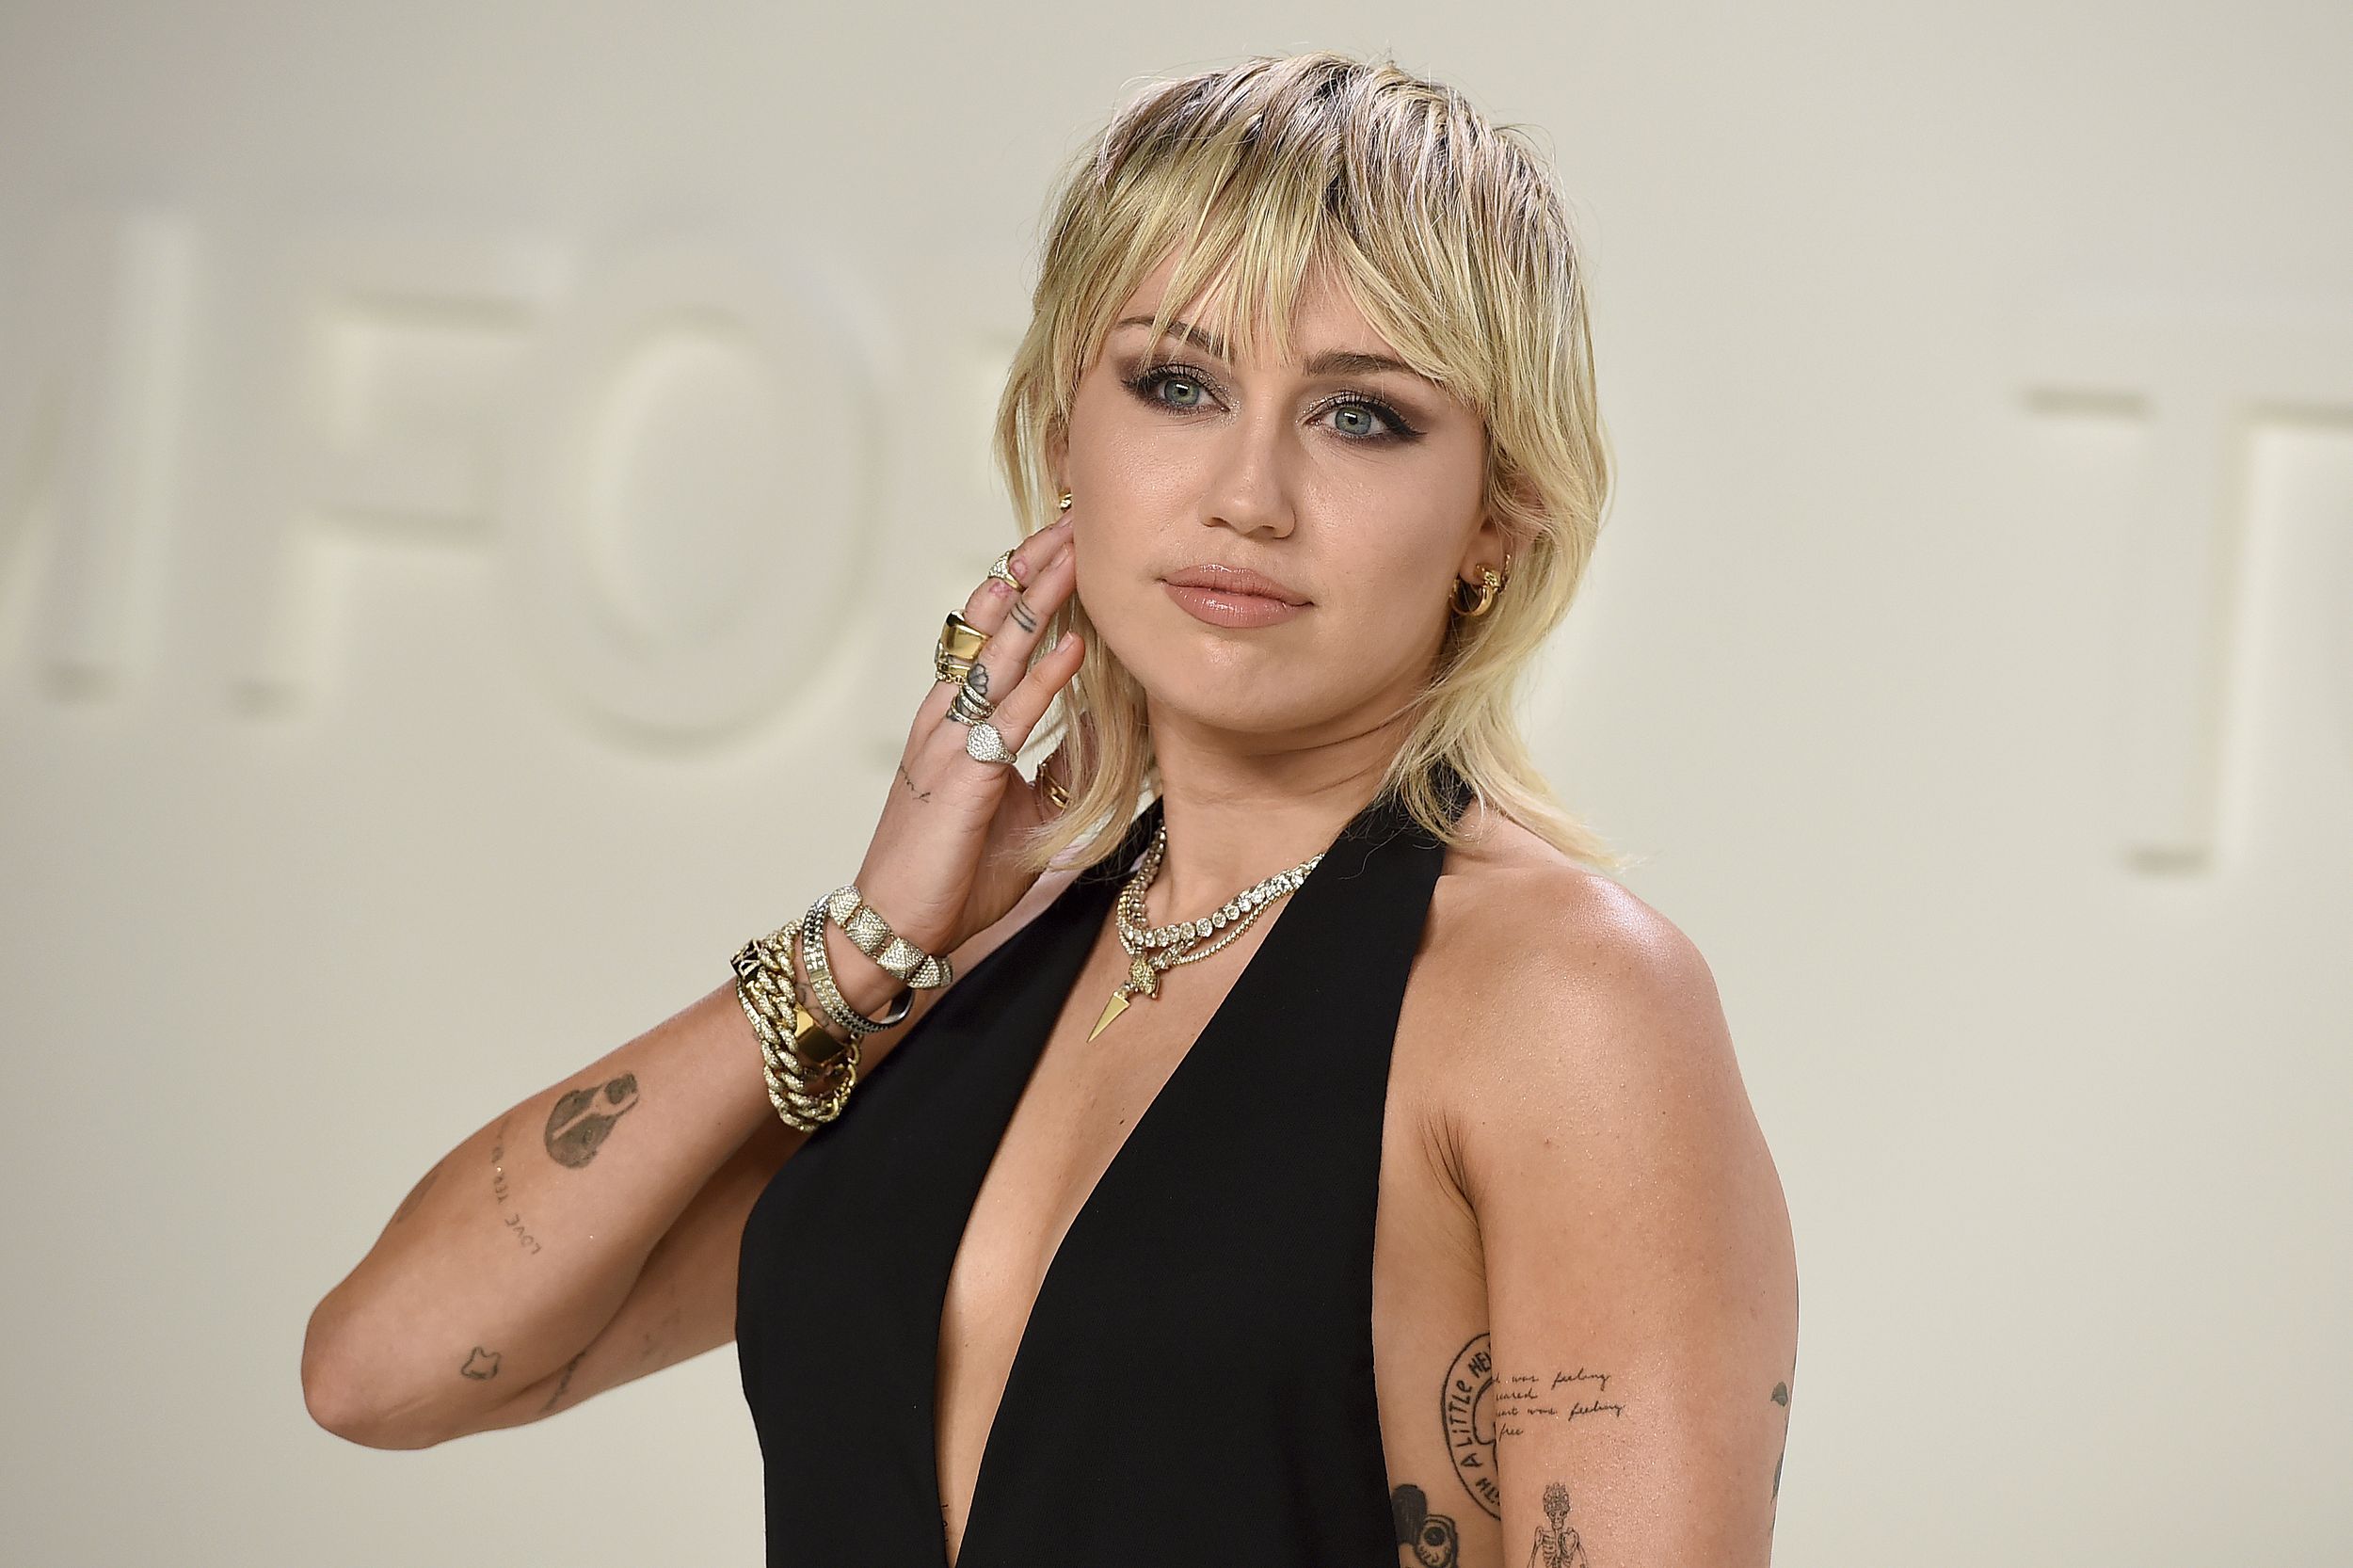 Miley Cyrus releases Plastic Hearts tracklist as she features Dua Lipa